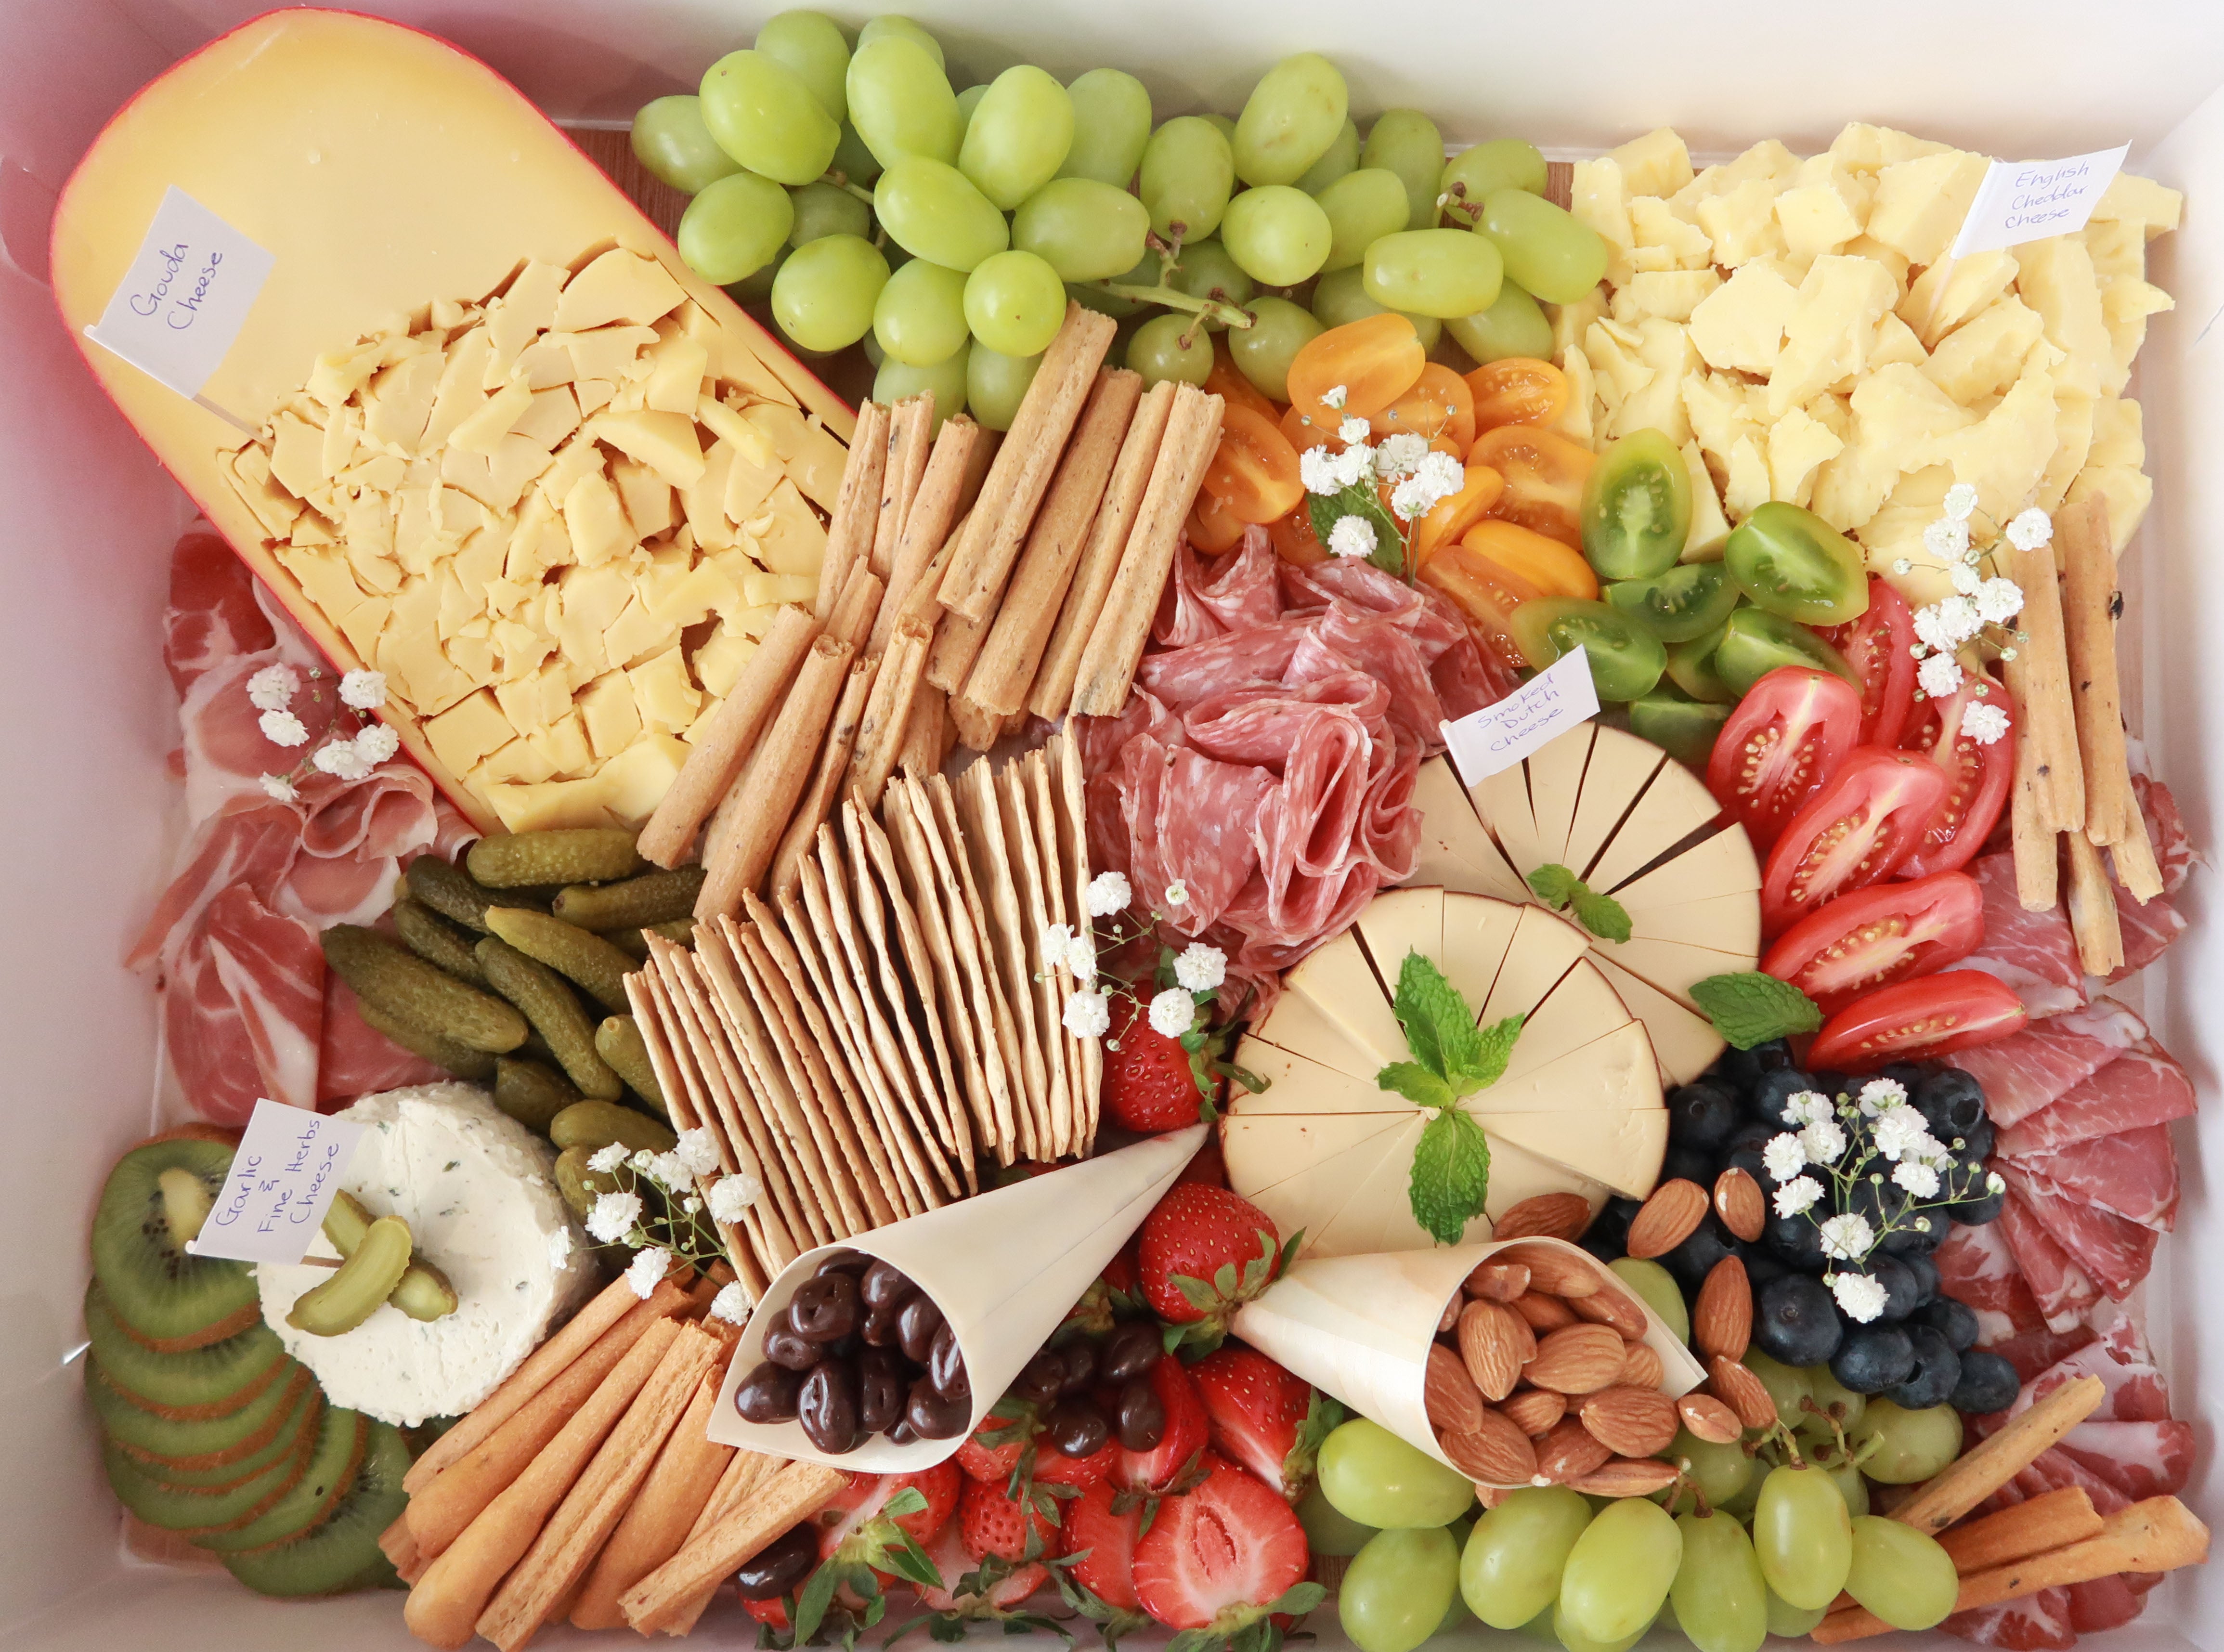 Large Cheeseboard For 20-25 People